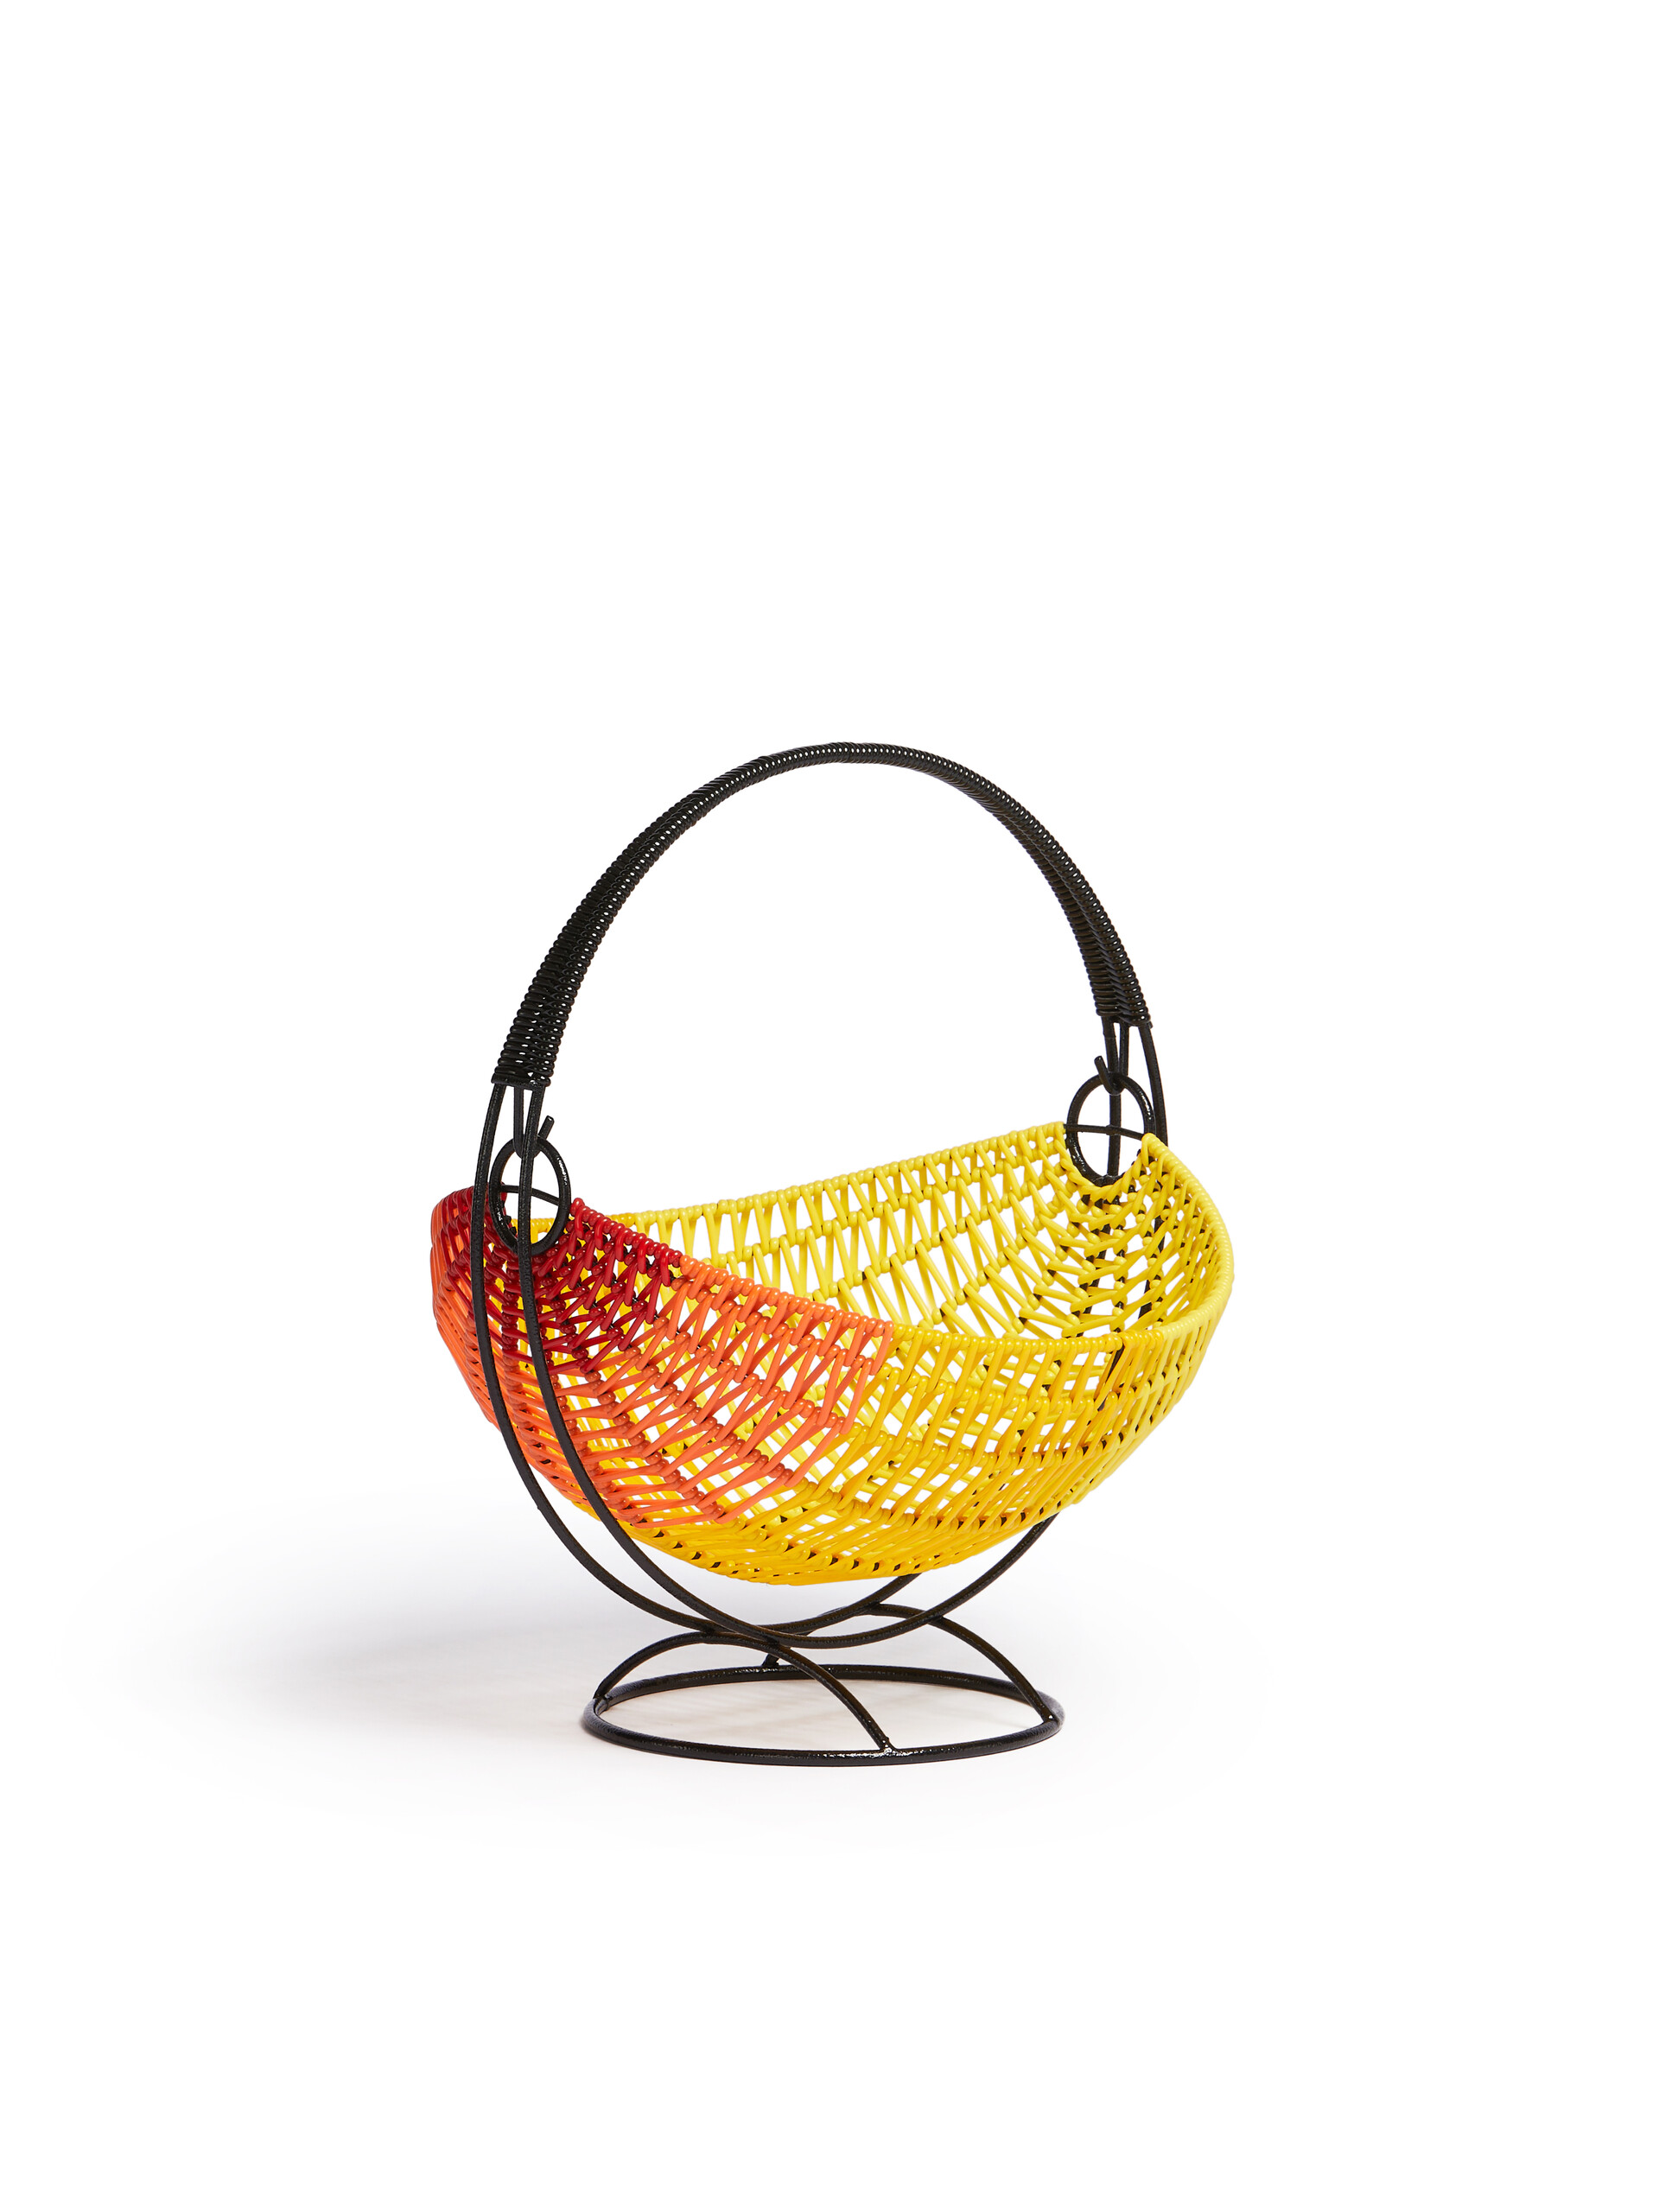 Yellow and red MARNI MARKET woven cable fruit basket - Accessories - Image 2